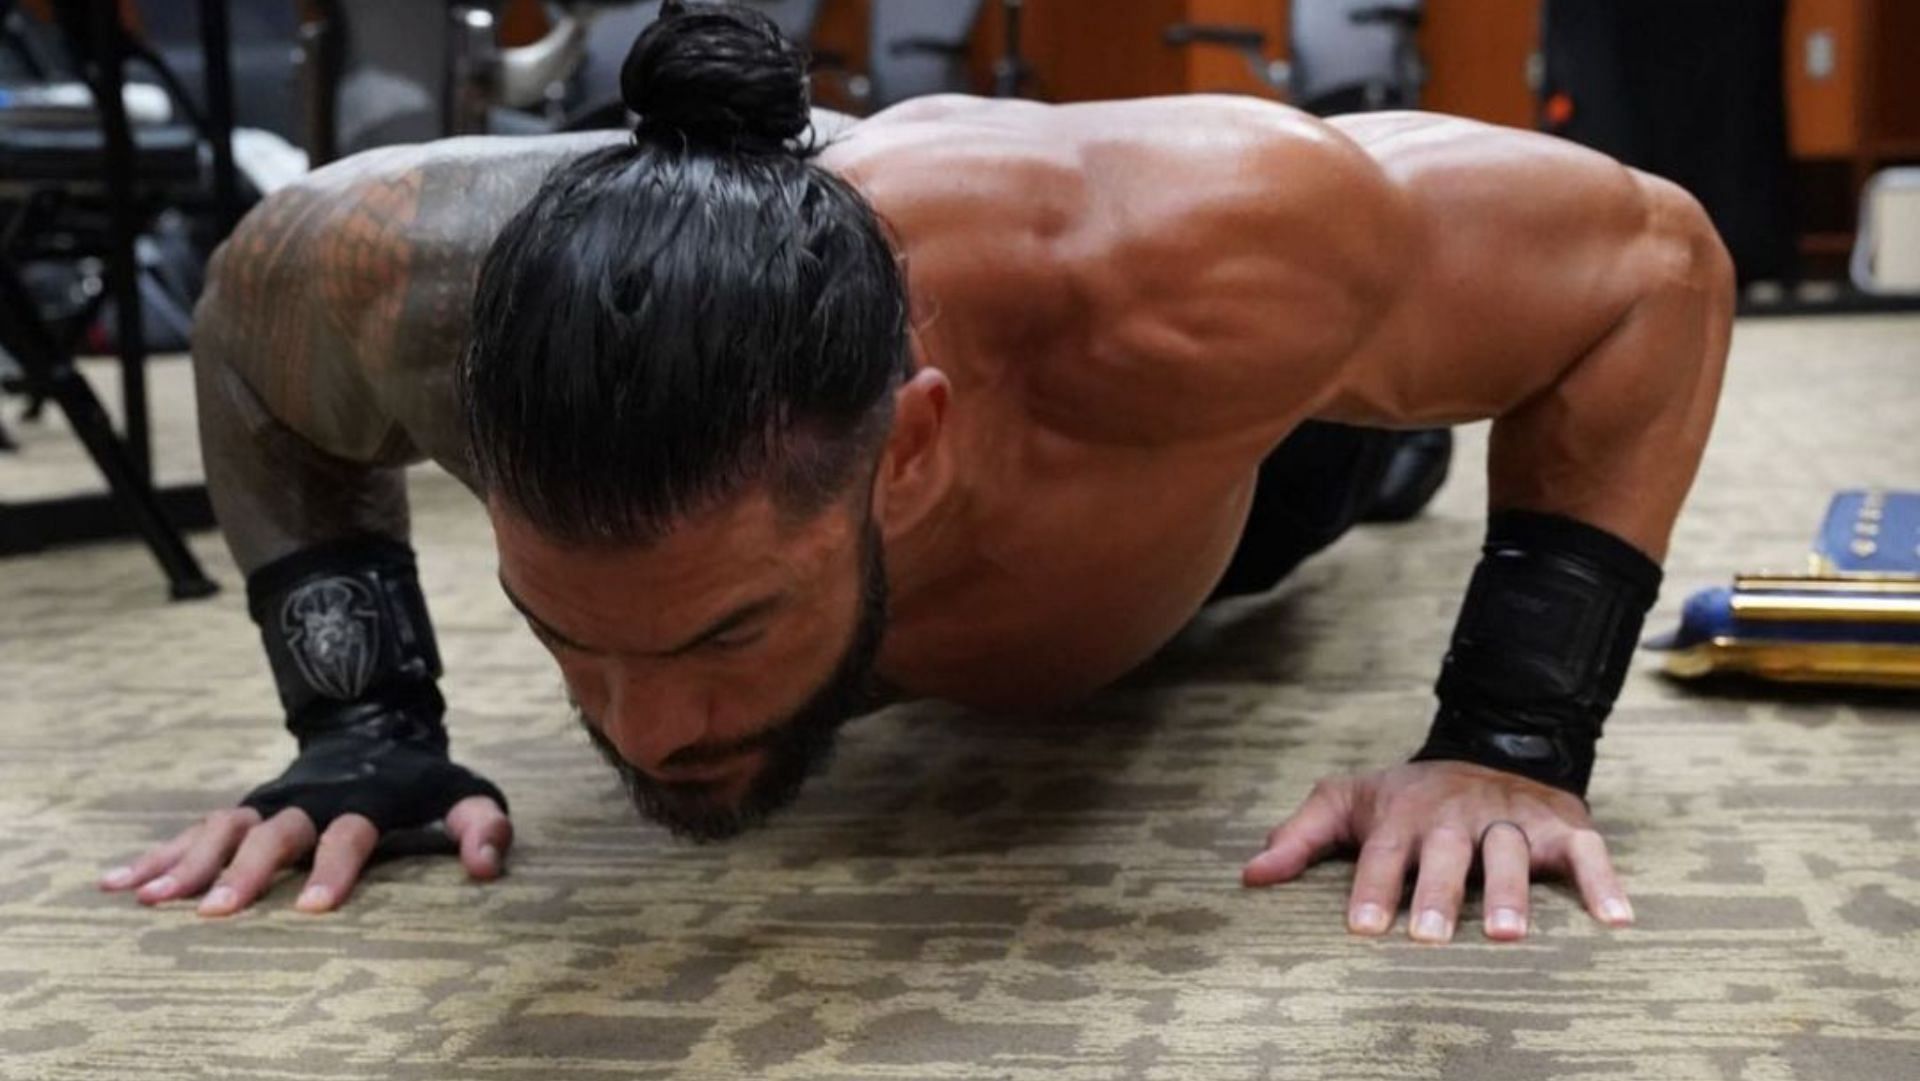 Roman Reigns workout routine Exercises, Diet, Schedule and more explored